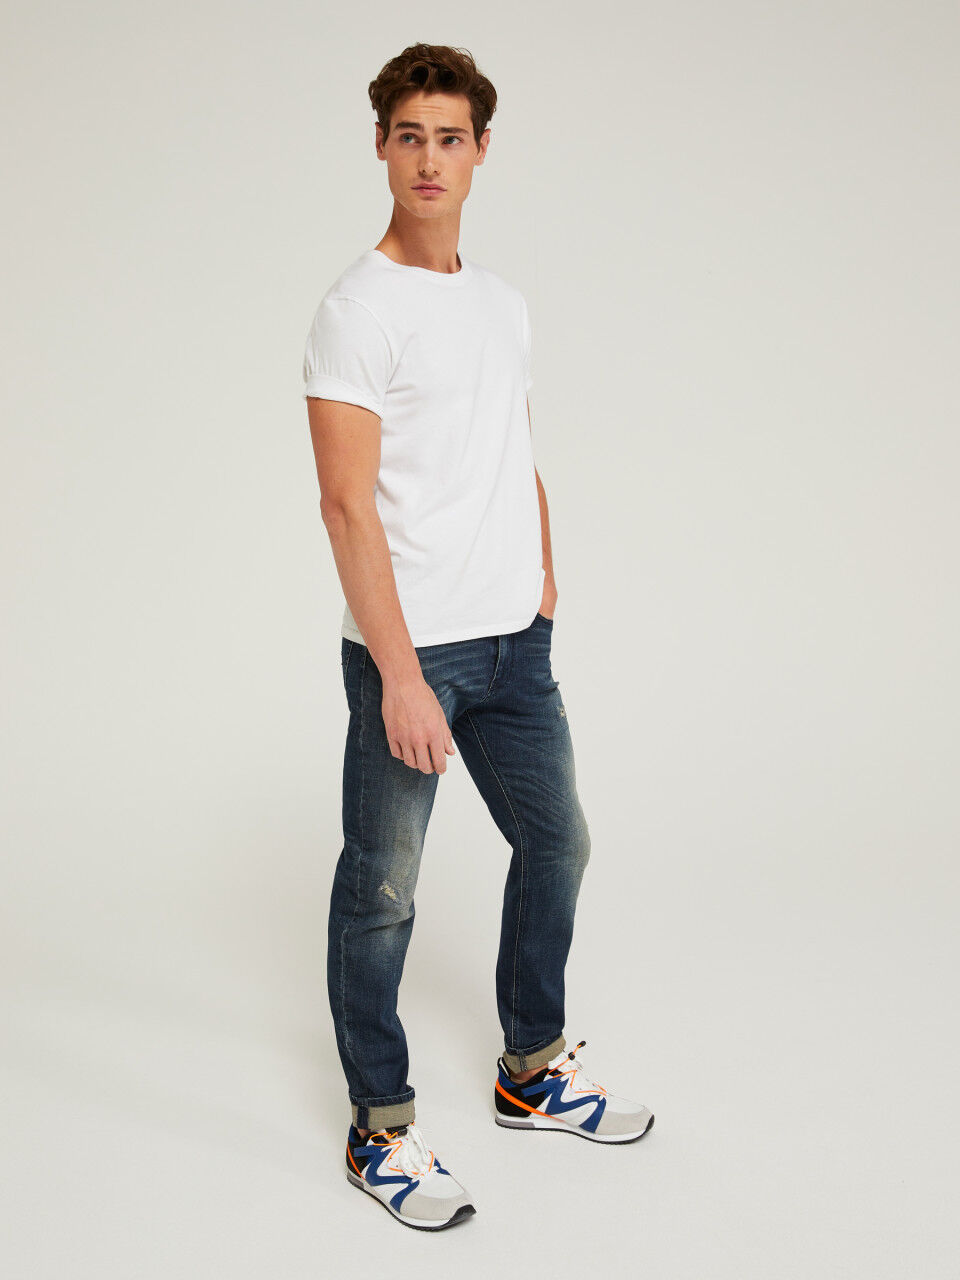 Men's Jeans New Collection 2021 | Sisley